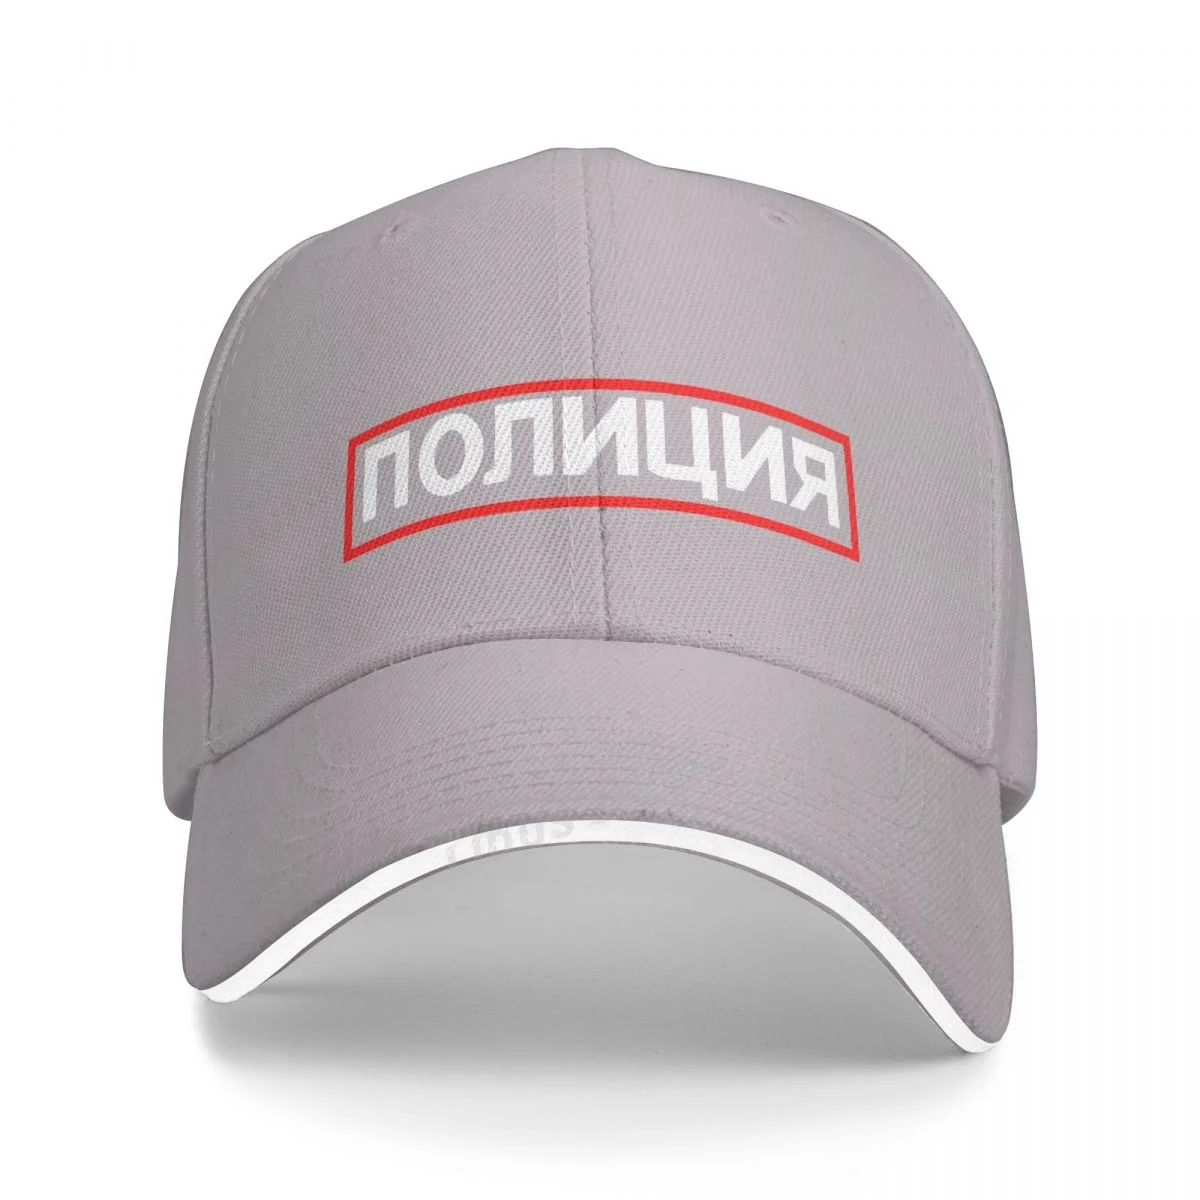 Russian Police Emblem Baseball Caps Cool Russian Police Hats Fashion Outdoor Adjustable Caps